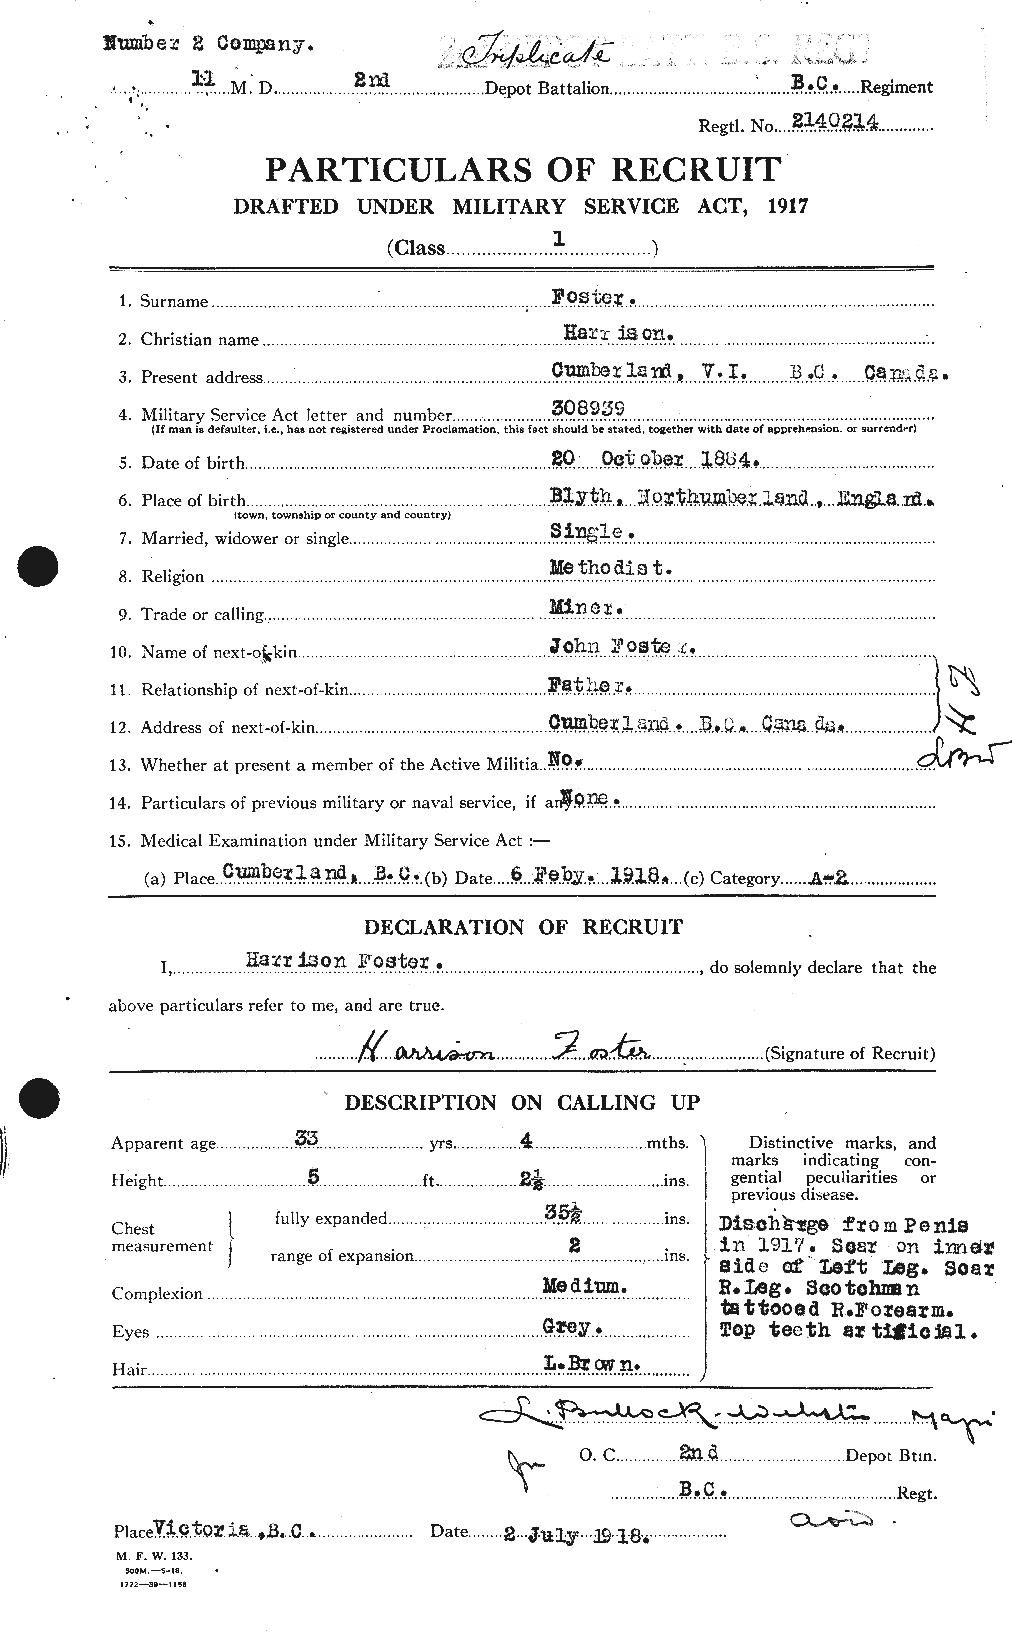 Personnel Records of the First World War - CEF 330733a